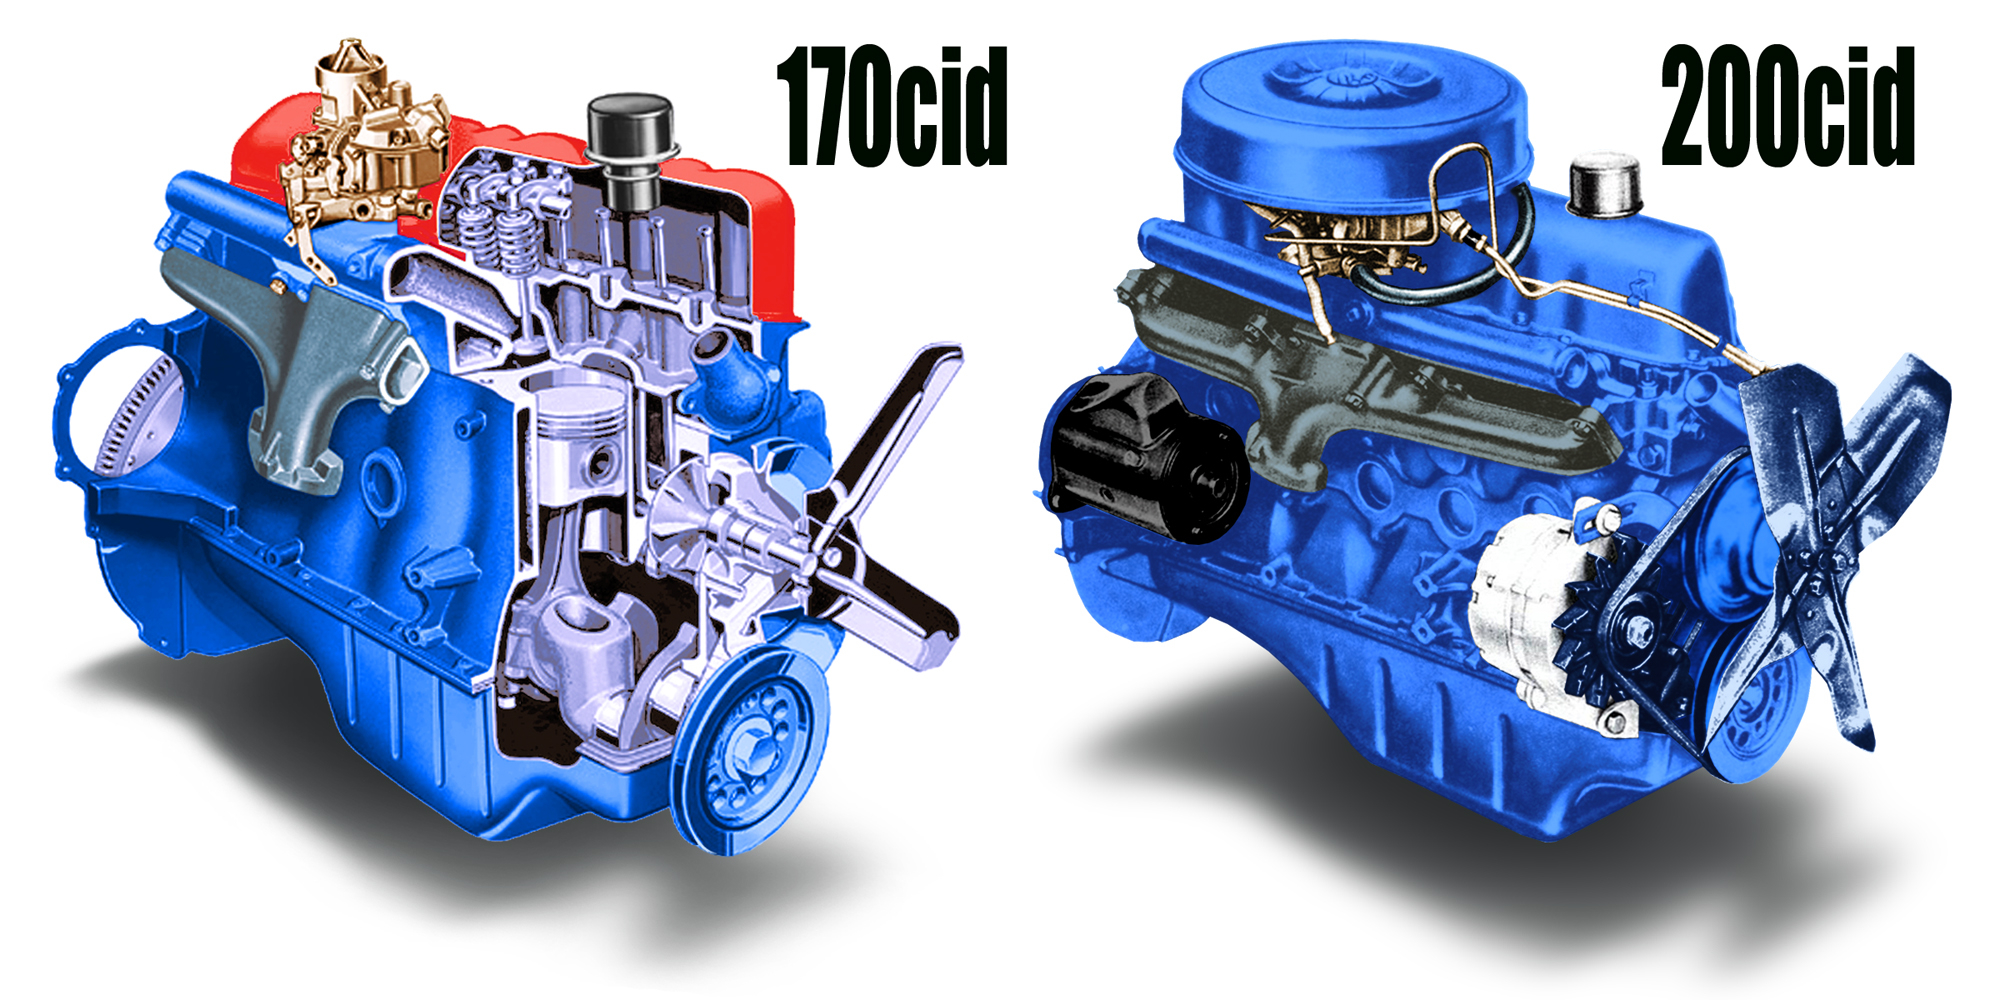 File:ford 170 And 200Cid I-6 Engines - Wikimedia Commons